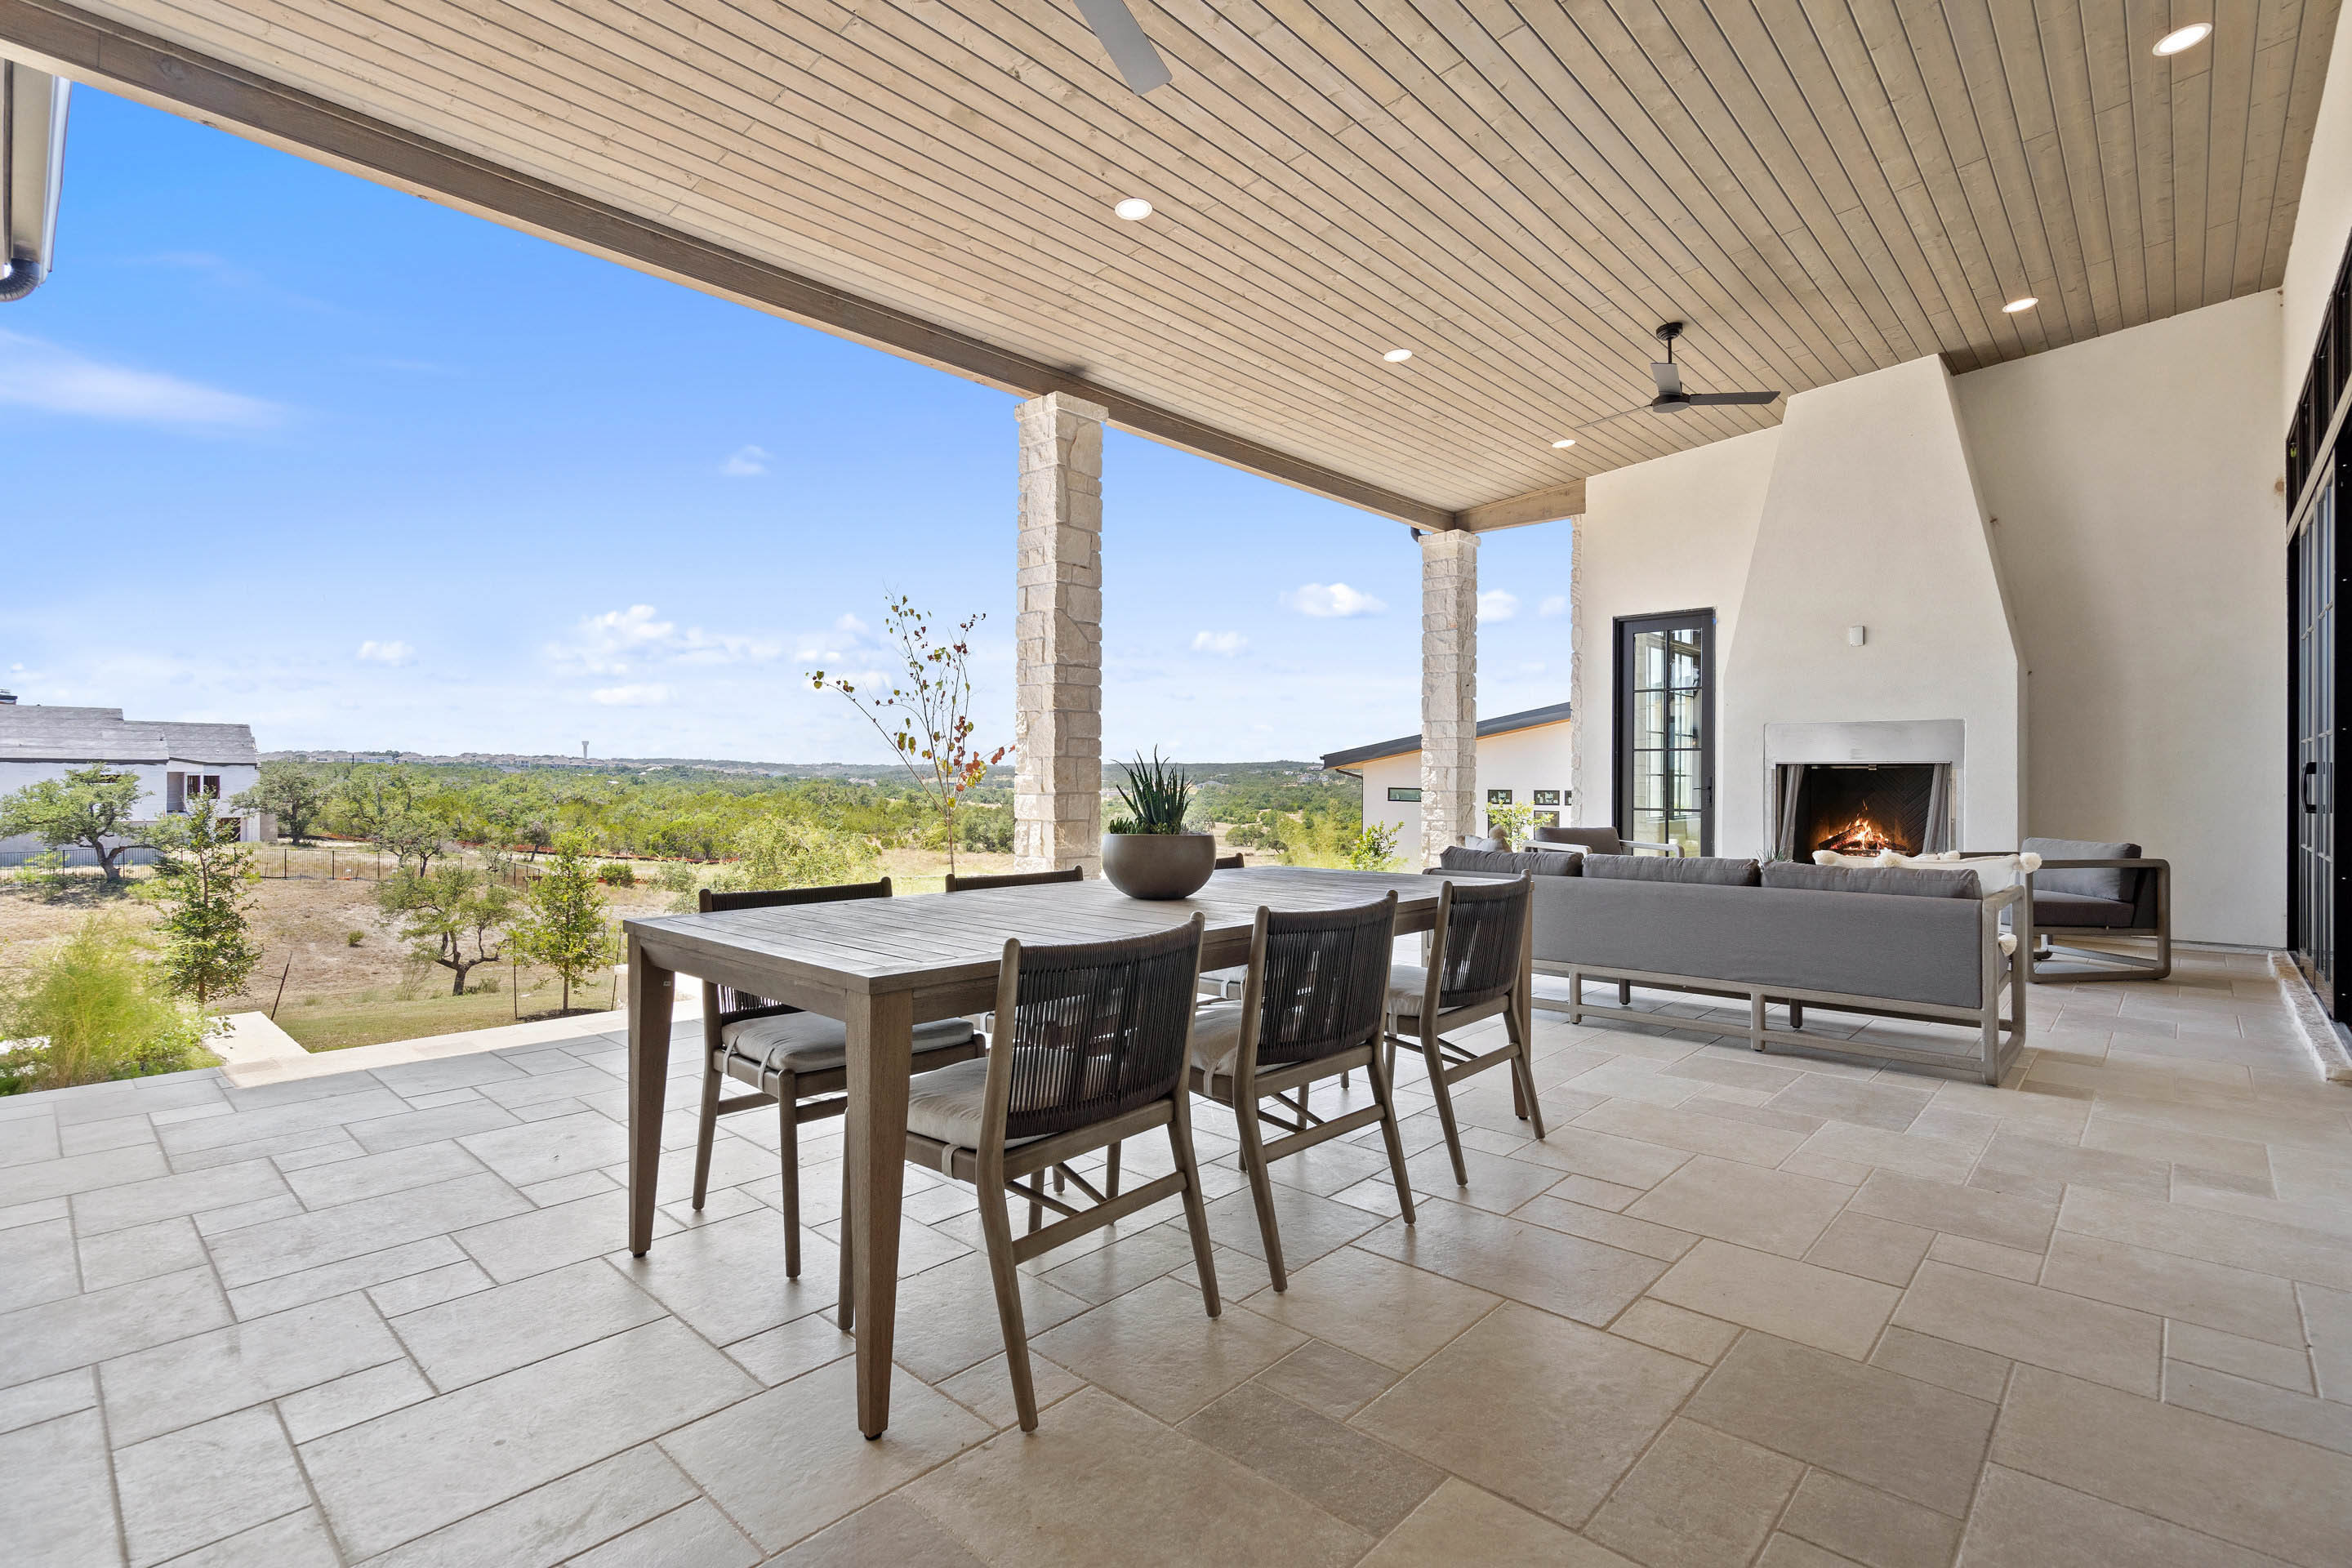 Home Construction - Southerly Homes - Austin, TX, Custom Home Builders In Austin